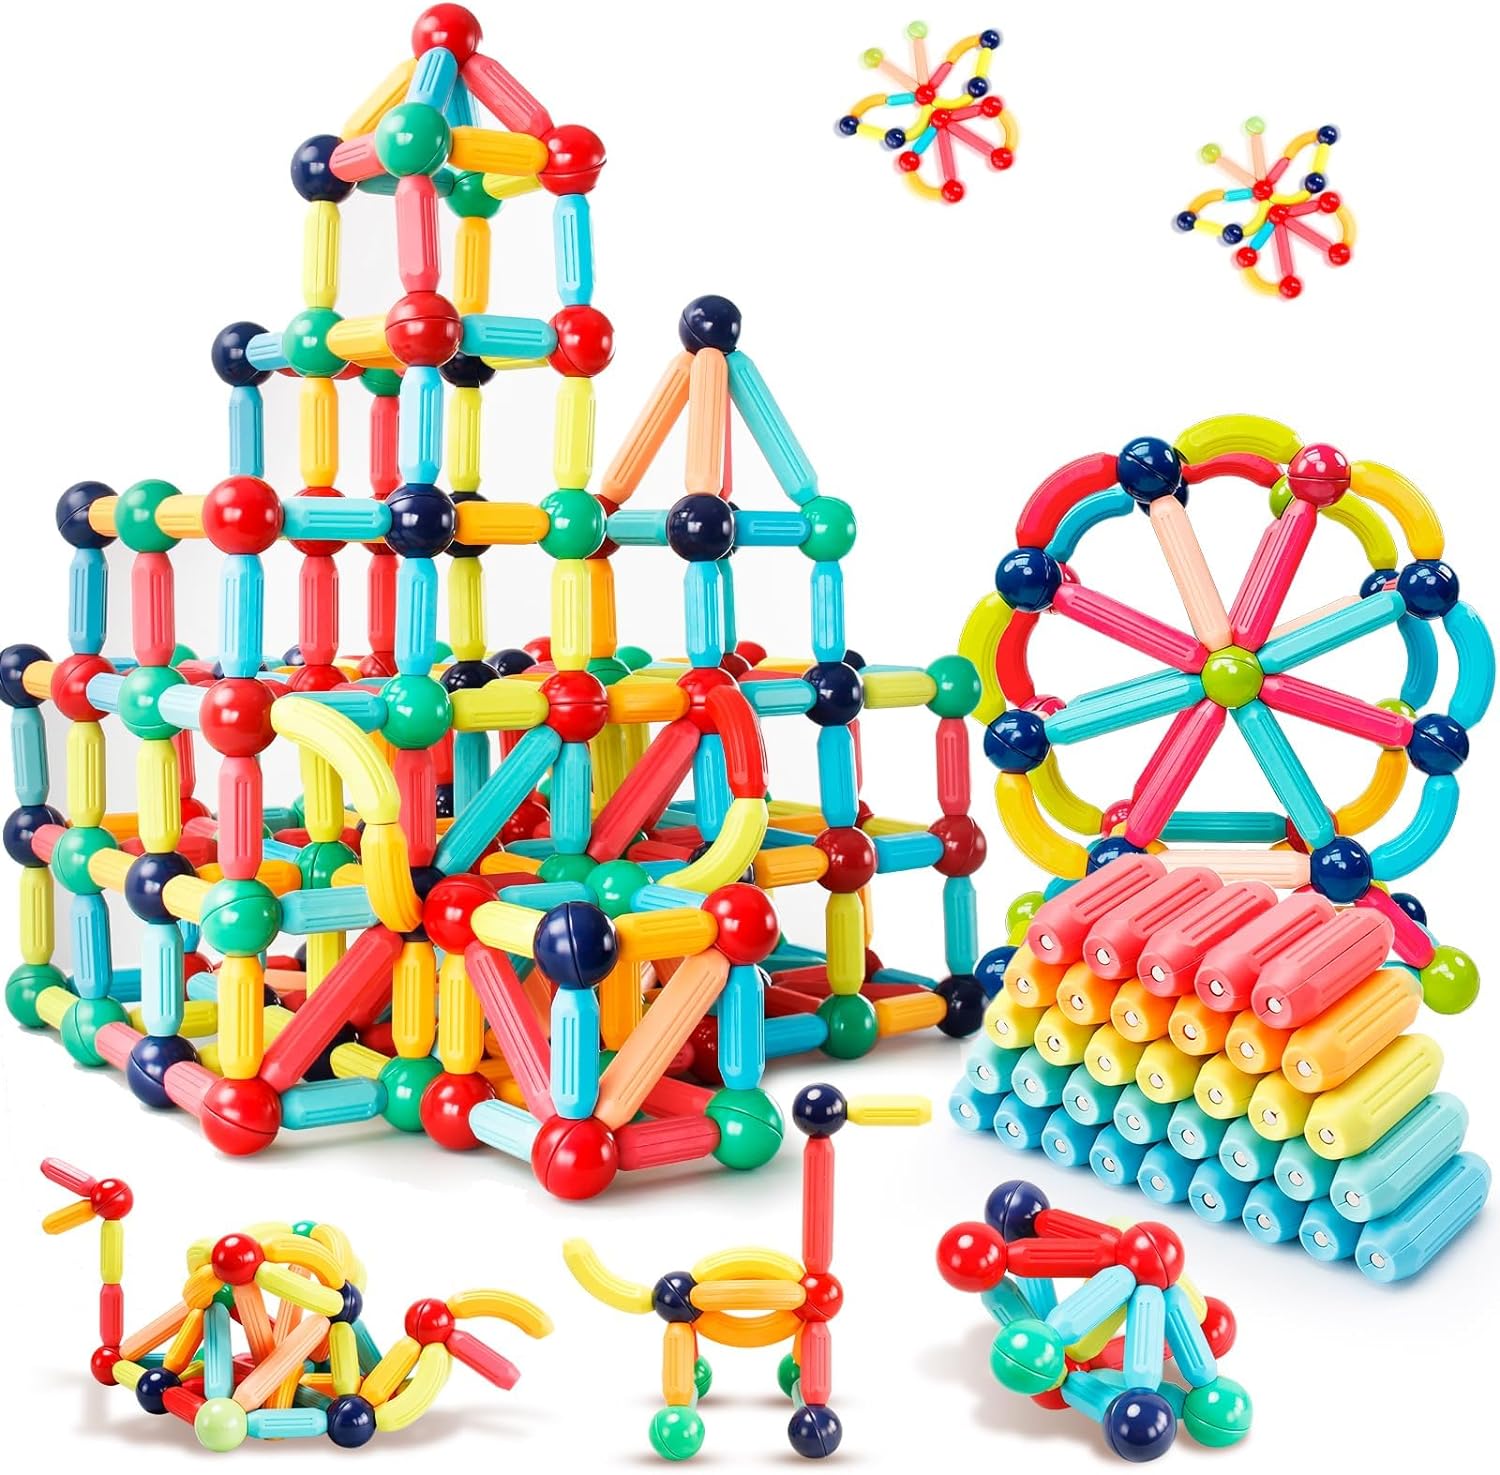 DMOIU Magnetic Building Blocks STEM Educational Toy for Kids Montessori Learning Sticks and Balls, Sensory Activities Toys for Toddlers, Gift for Boys and Girls Preschool